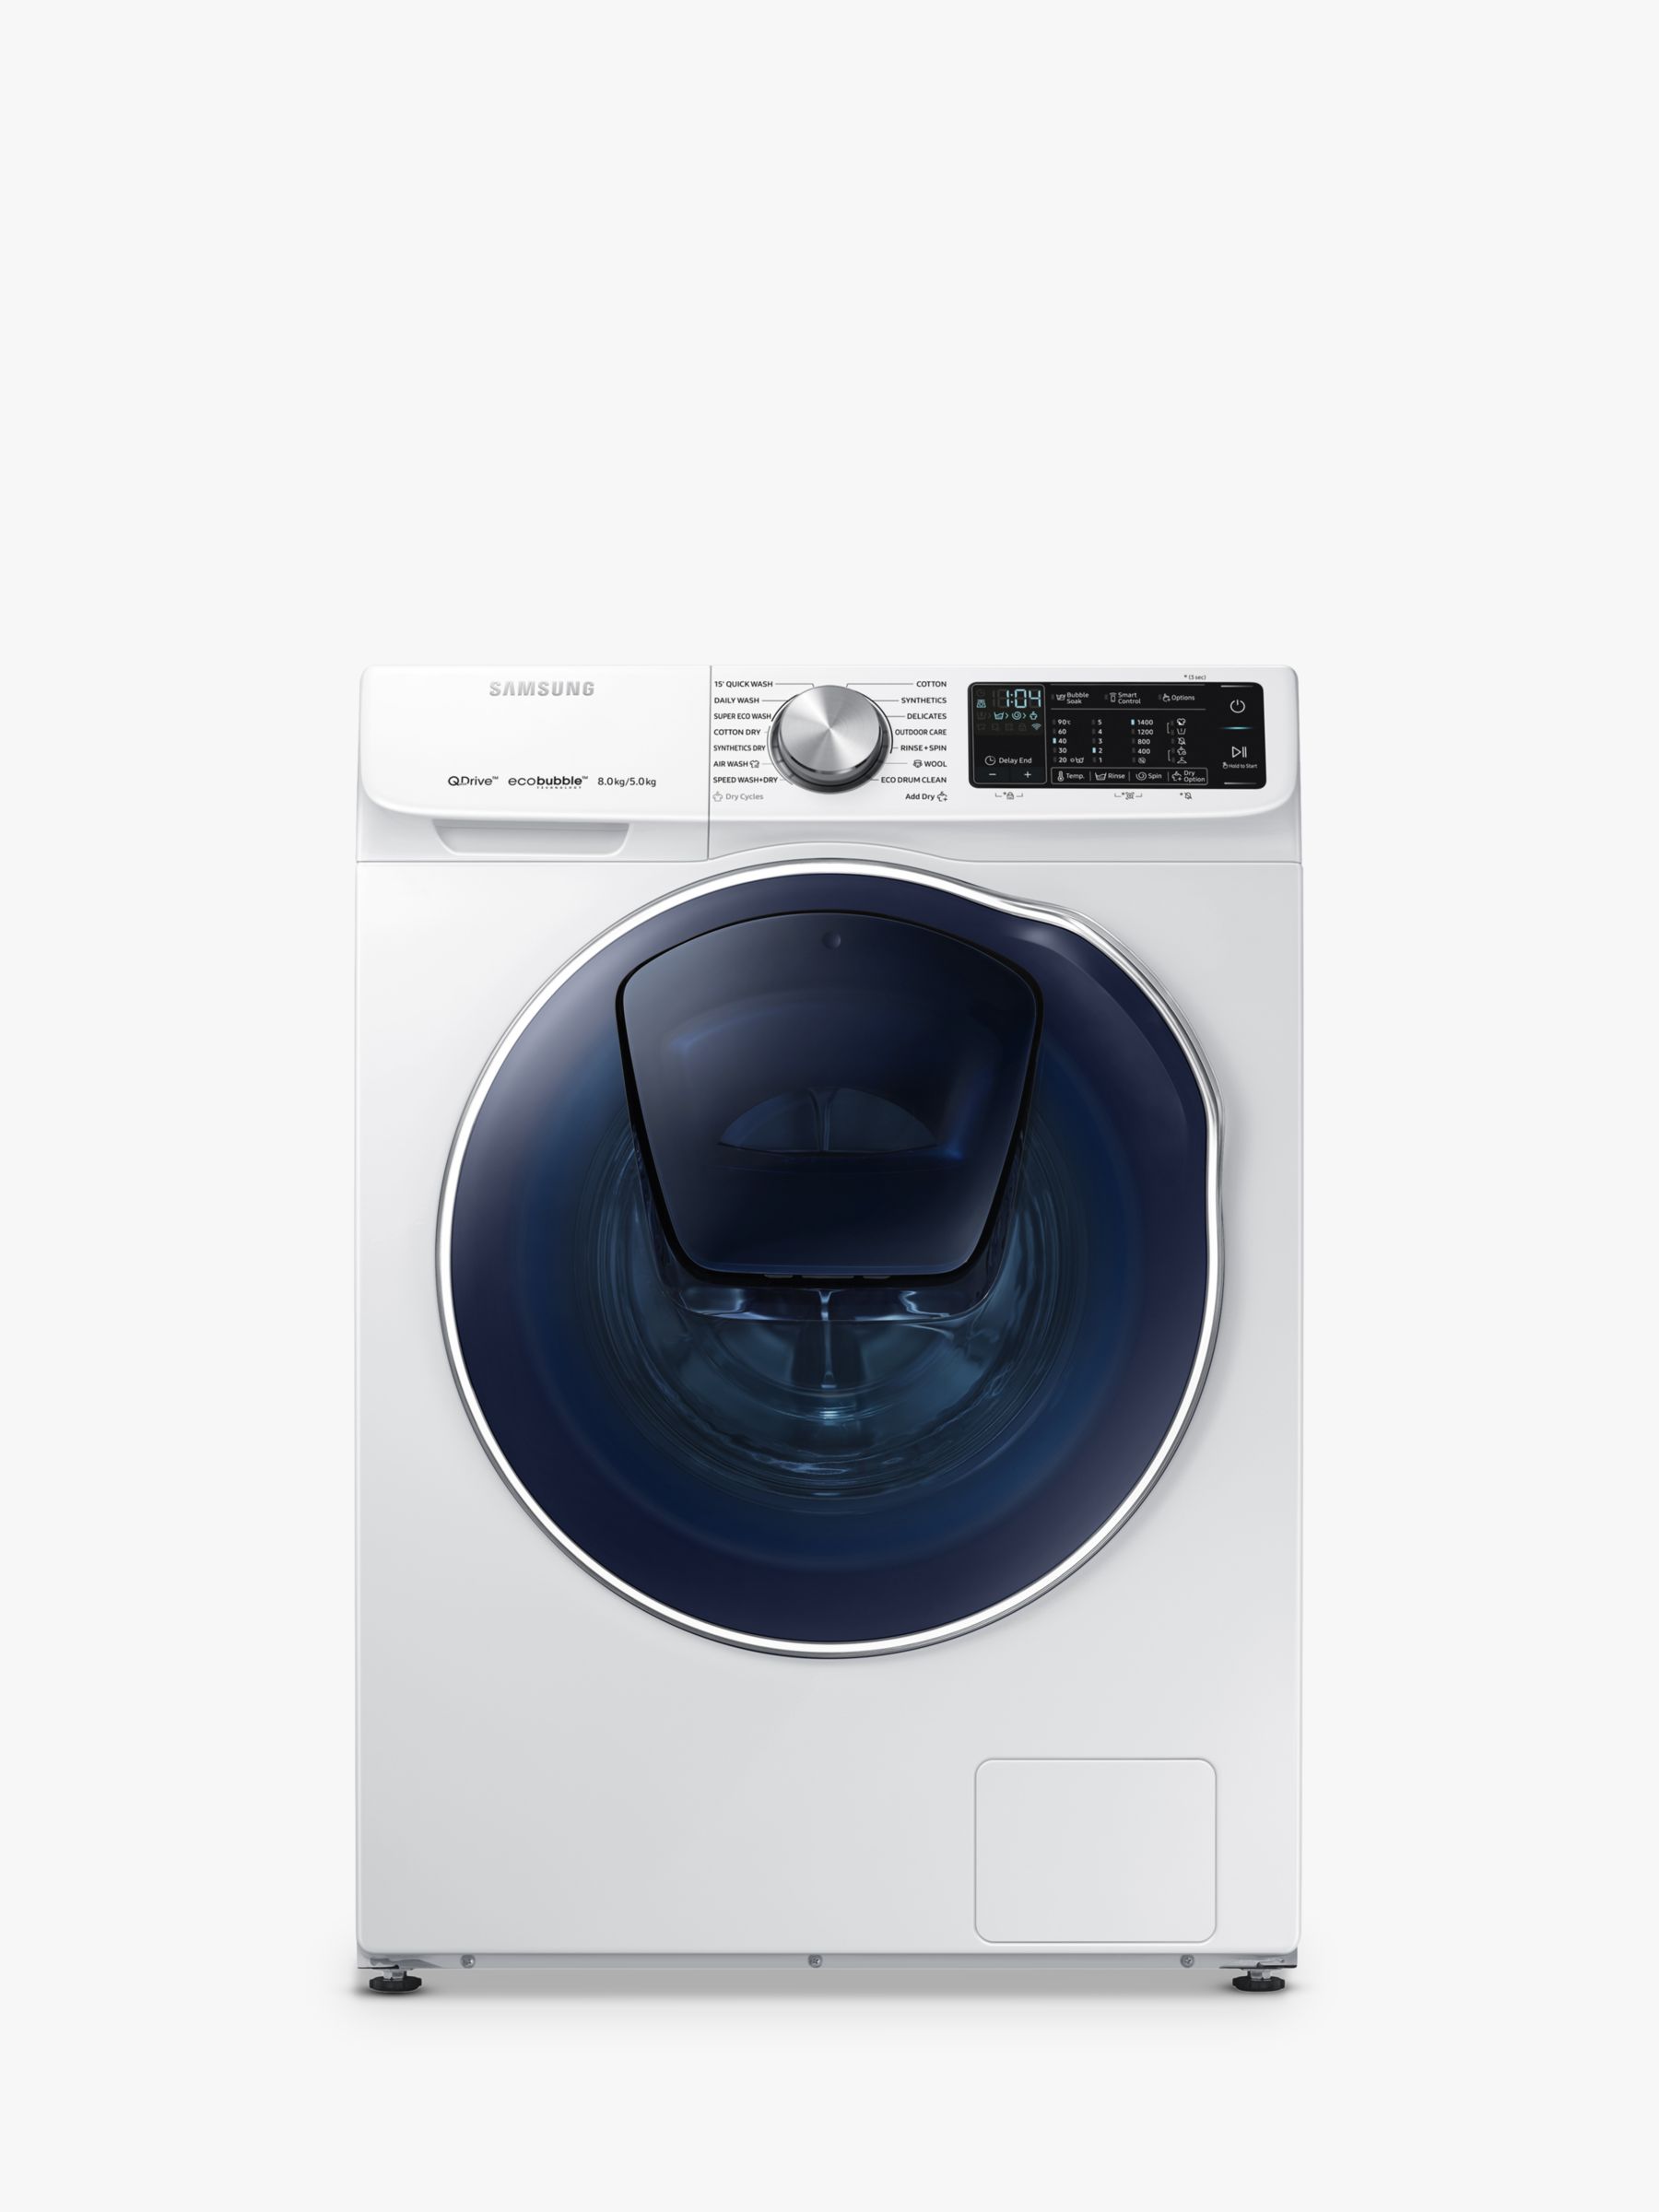 Samsung WD80N645OOW Washer Dryer, 8kg Wash/5kg Dry Load, A Energy Rating, 1400rpm Spin, White